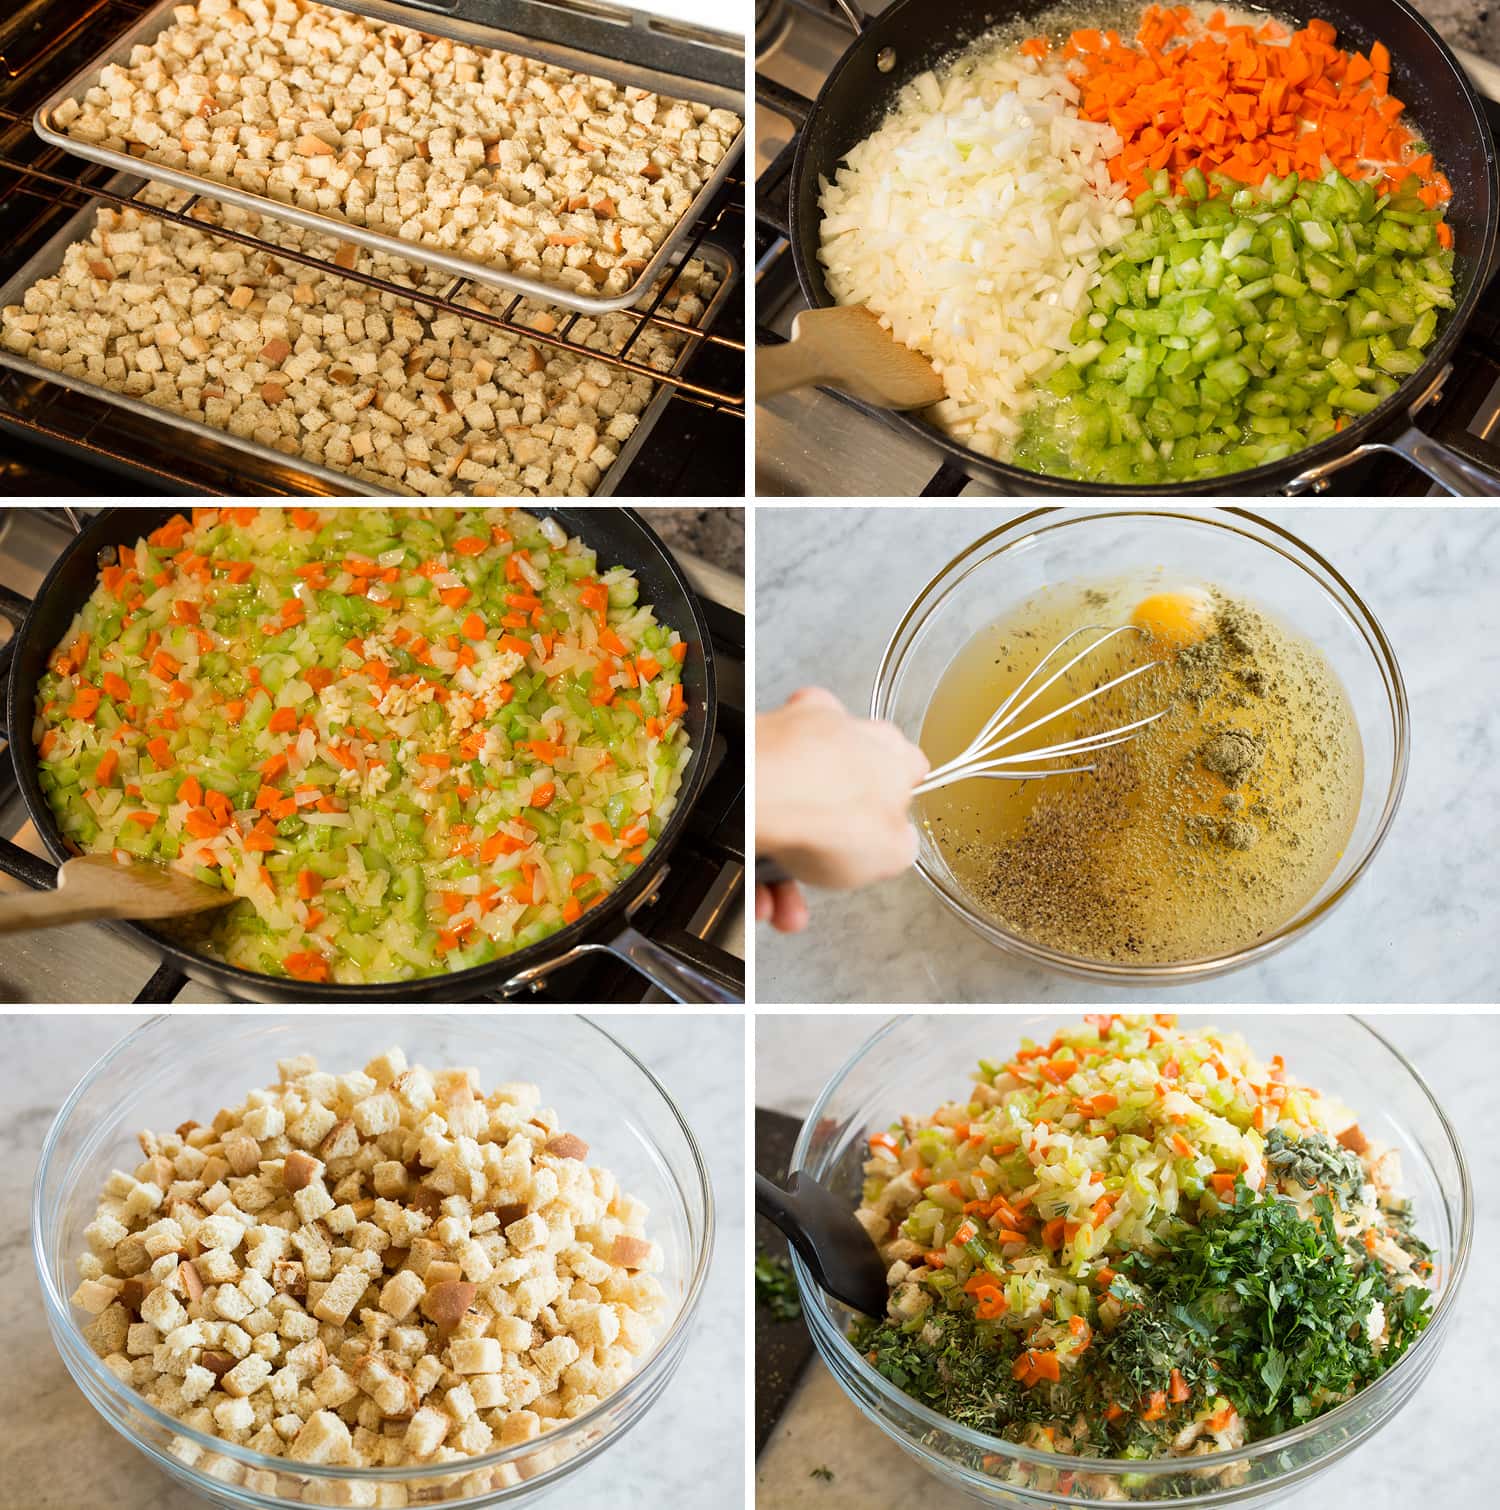 Collage of six photos showing steps of drying bread cubes and sautéing vegetables for stuffing.